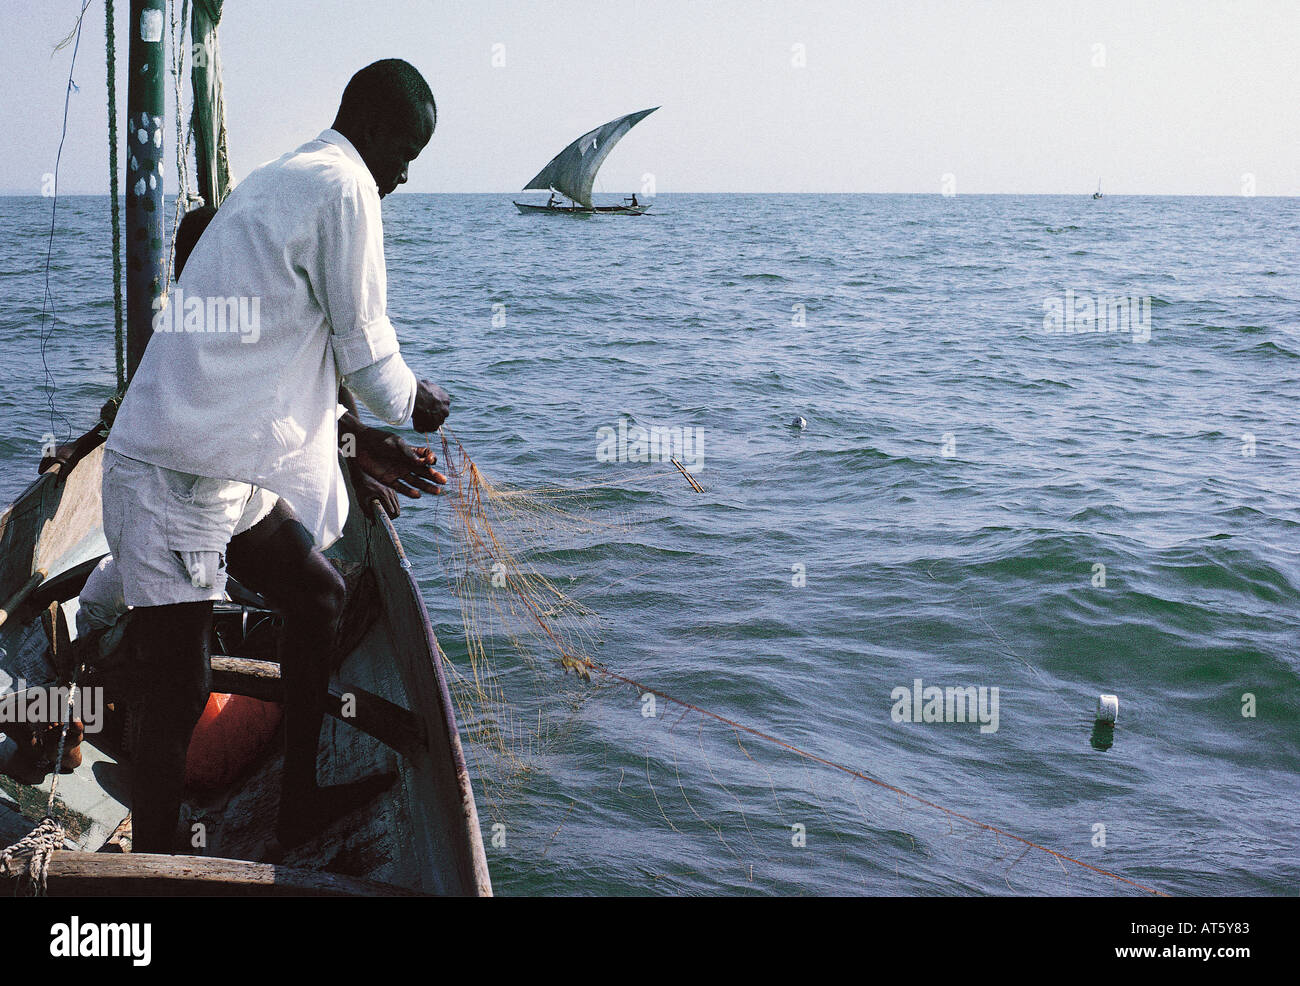 Luo fisherman checking his gill net from his sailing canoe Lake Victoria Kenya East Africa Stock Photo